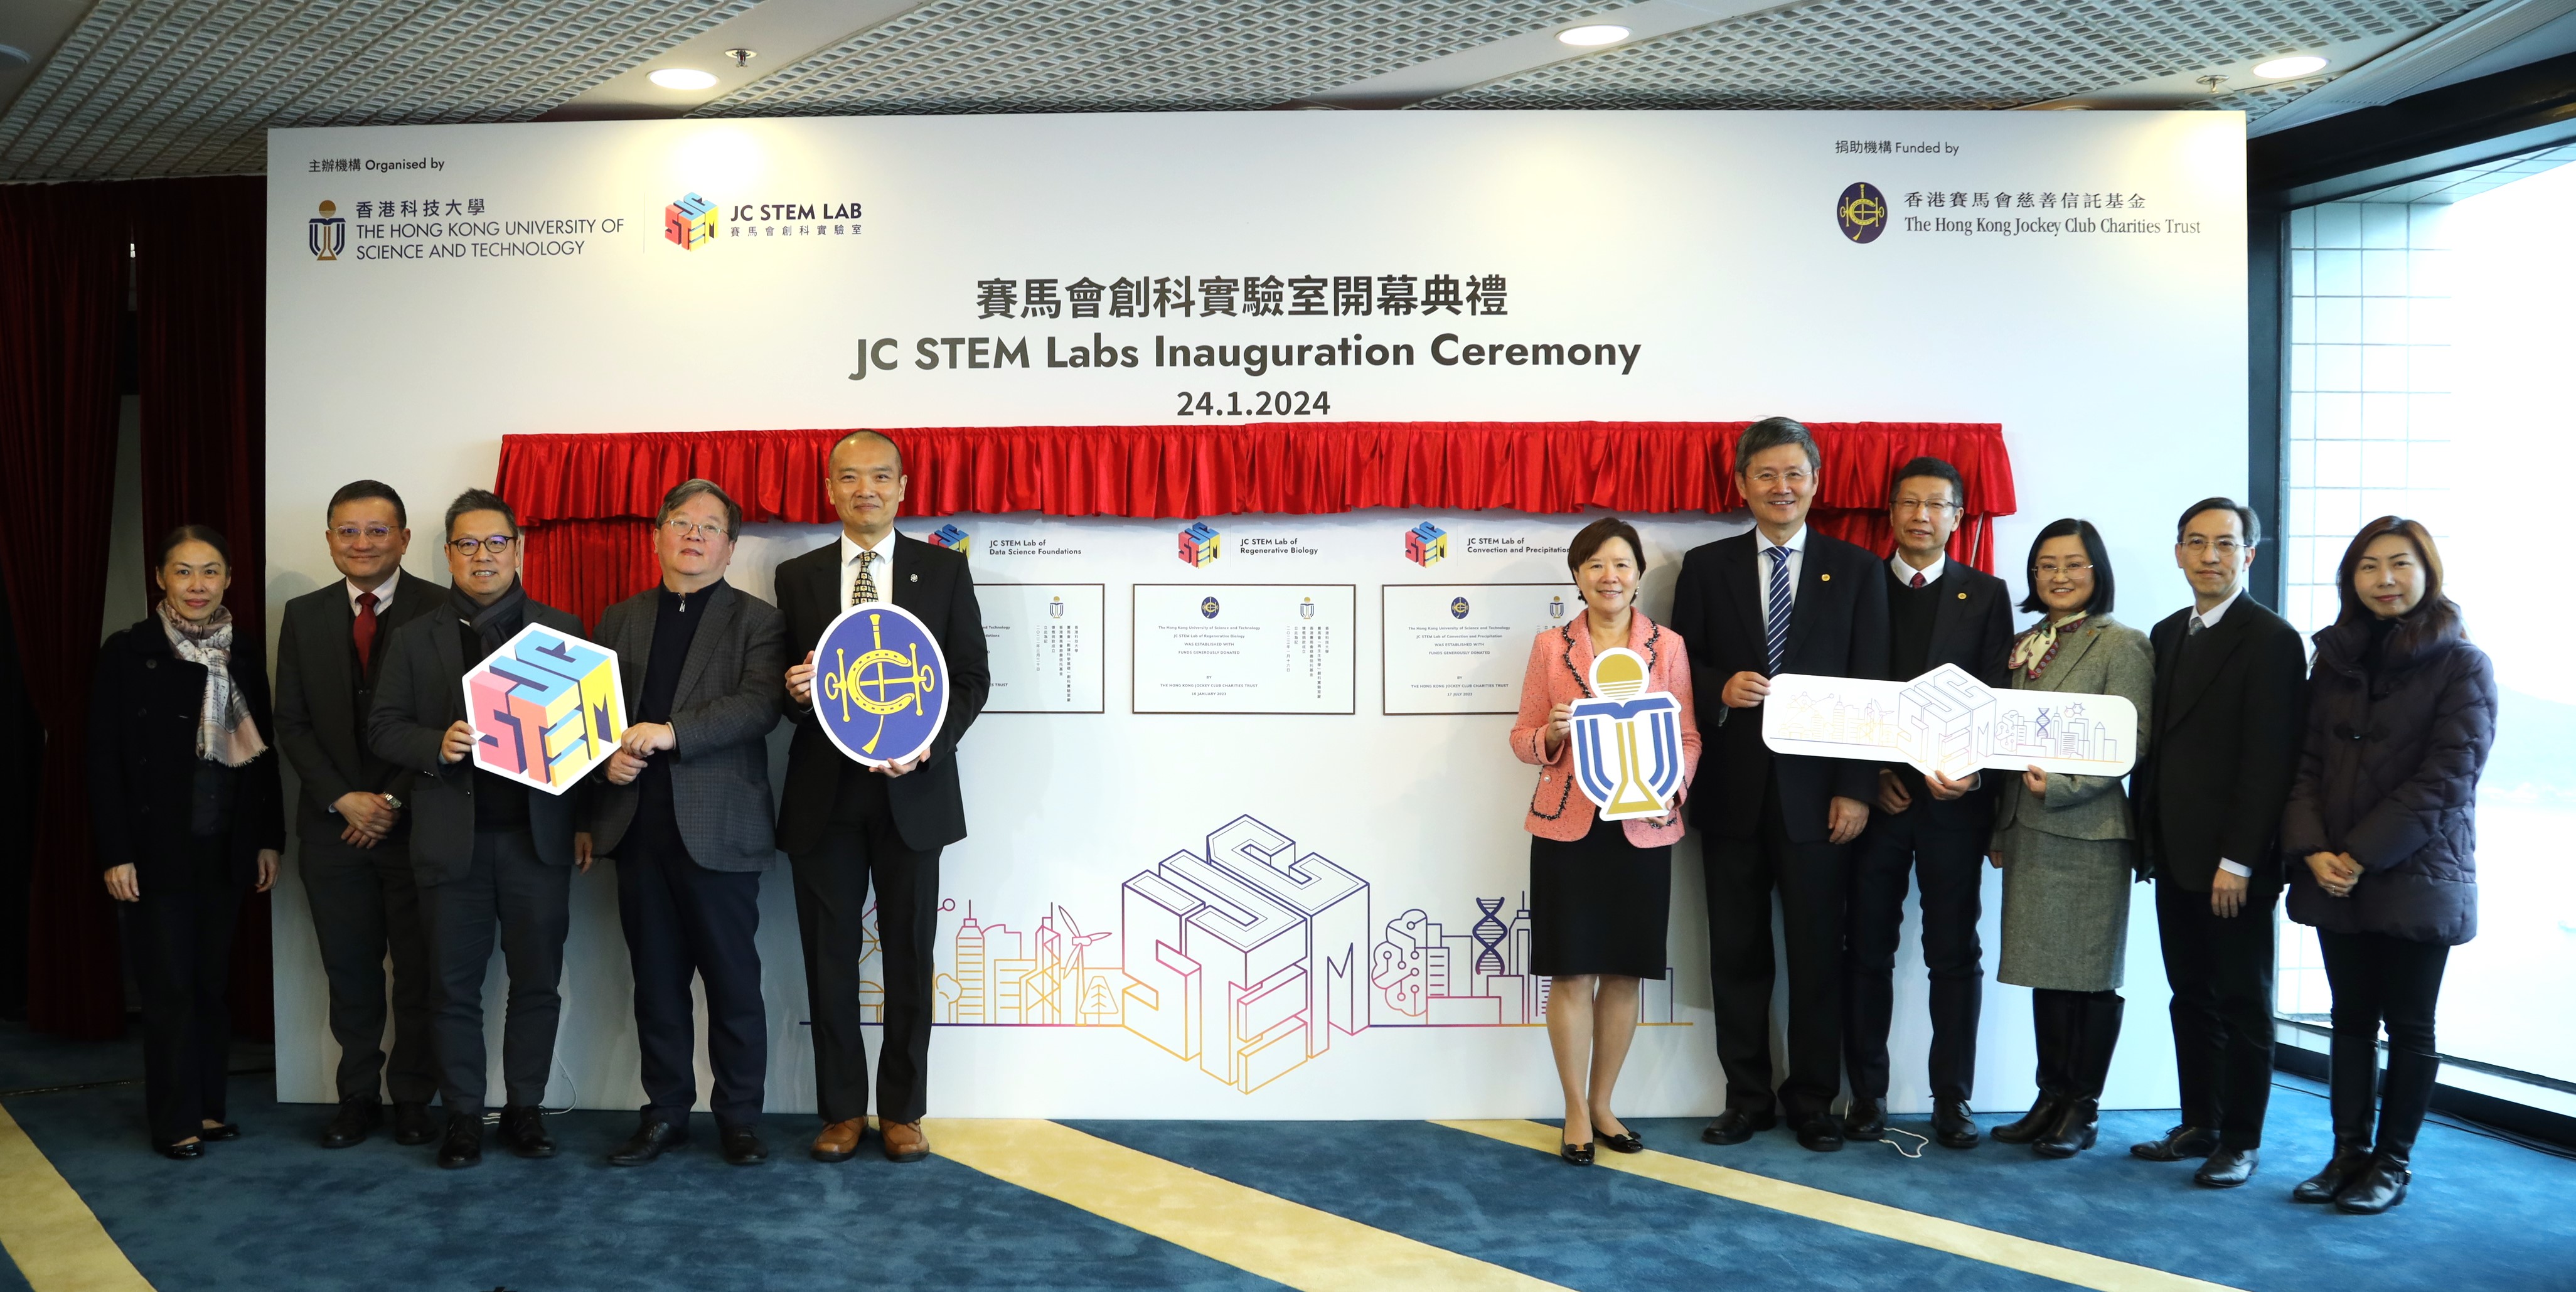 HKUST President Prof. Nancy IP (sixth right), Head of Charities (Positive Ageing and Elderly Care) of The Hong Kong Jockey Club Mr. Bryan WONG (fifth left), HKUST Provost Prof. GUO Yike (fourth left), and other senior management of HKUST inaugurate the three JC STEM Labs with three HKUST Global STEM Professors, namely Prof. ZHOU Xiaofang, Prof. XIE Ting and Prof. SU Hui (fifth to third right).